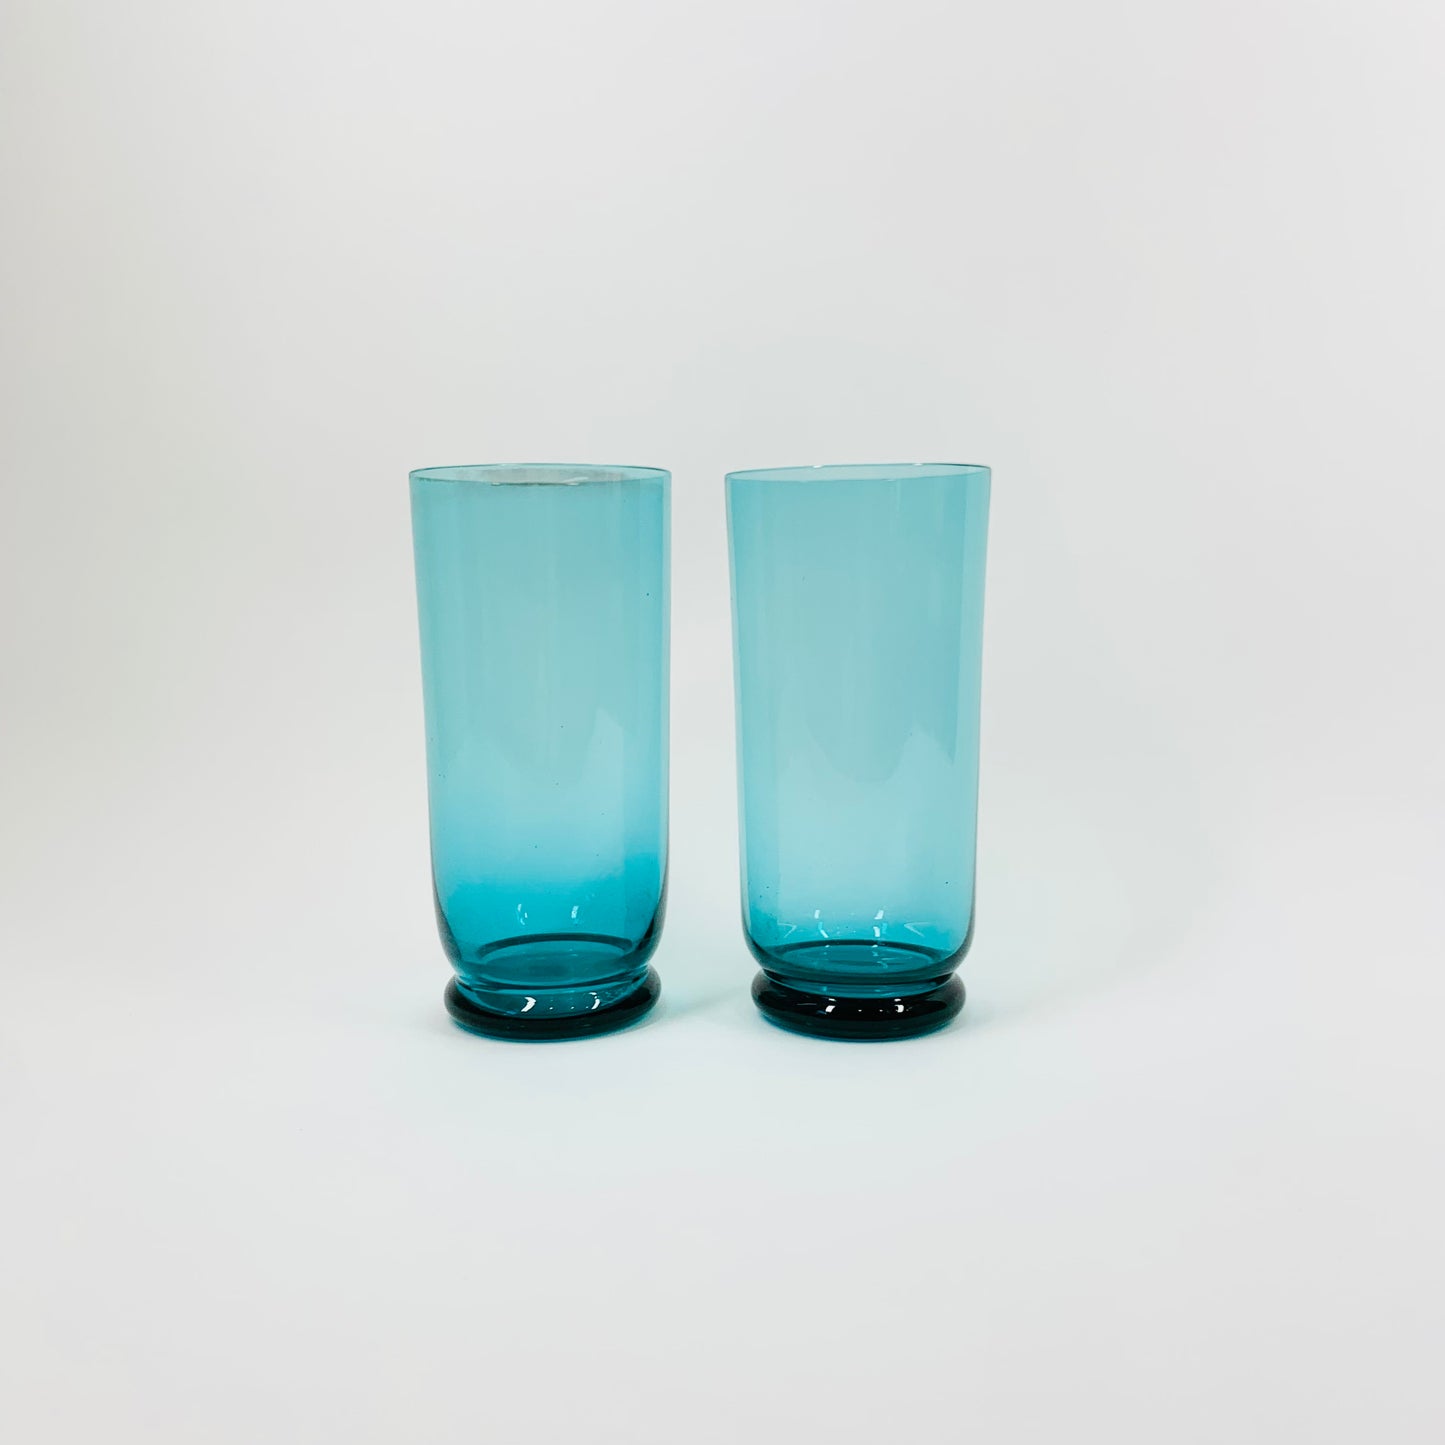 Rare complete Space Age Swedish turquoise blue glass pitcher/jug set with matching glasses and swizzle stick